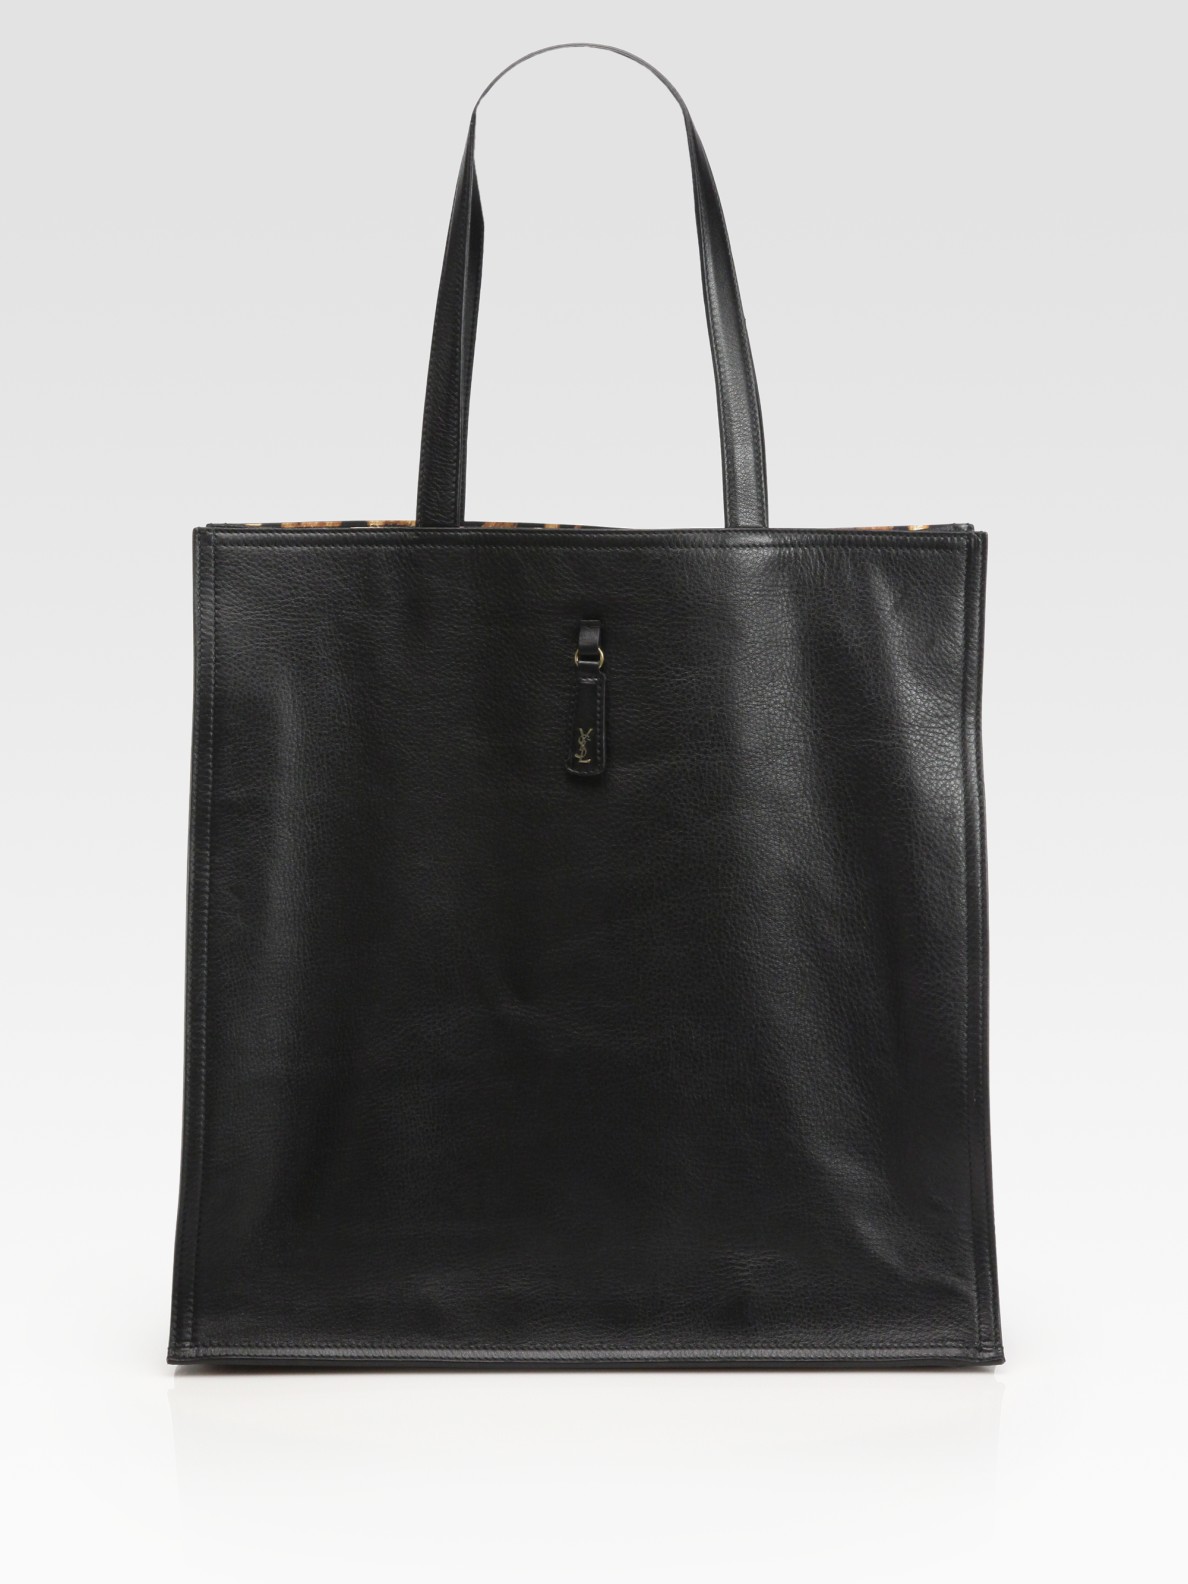 Saint Laurent Ysl Large Leather Tote Bag in Black | Lyst